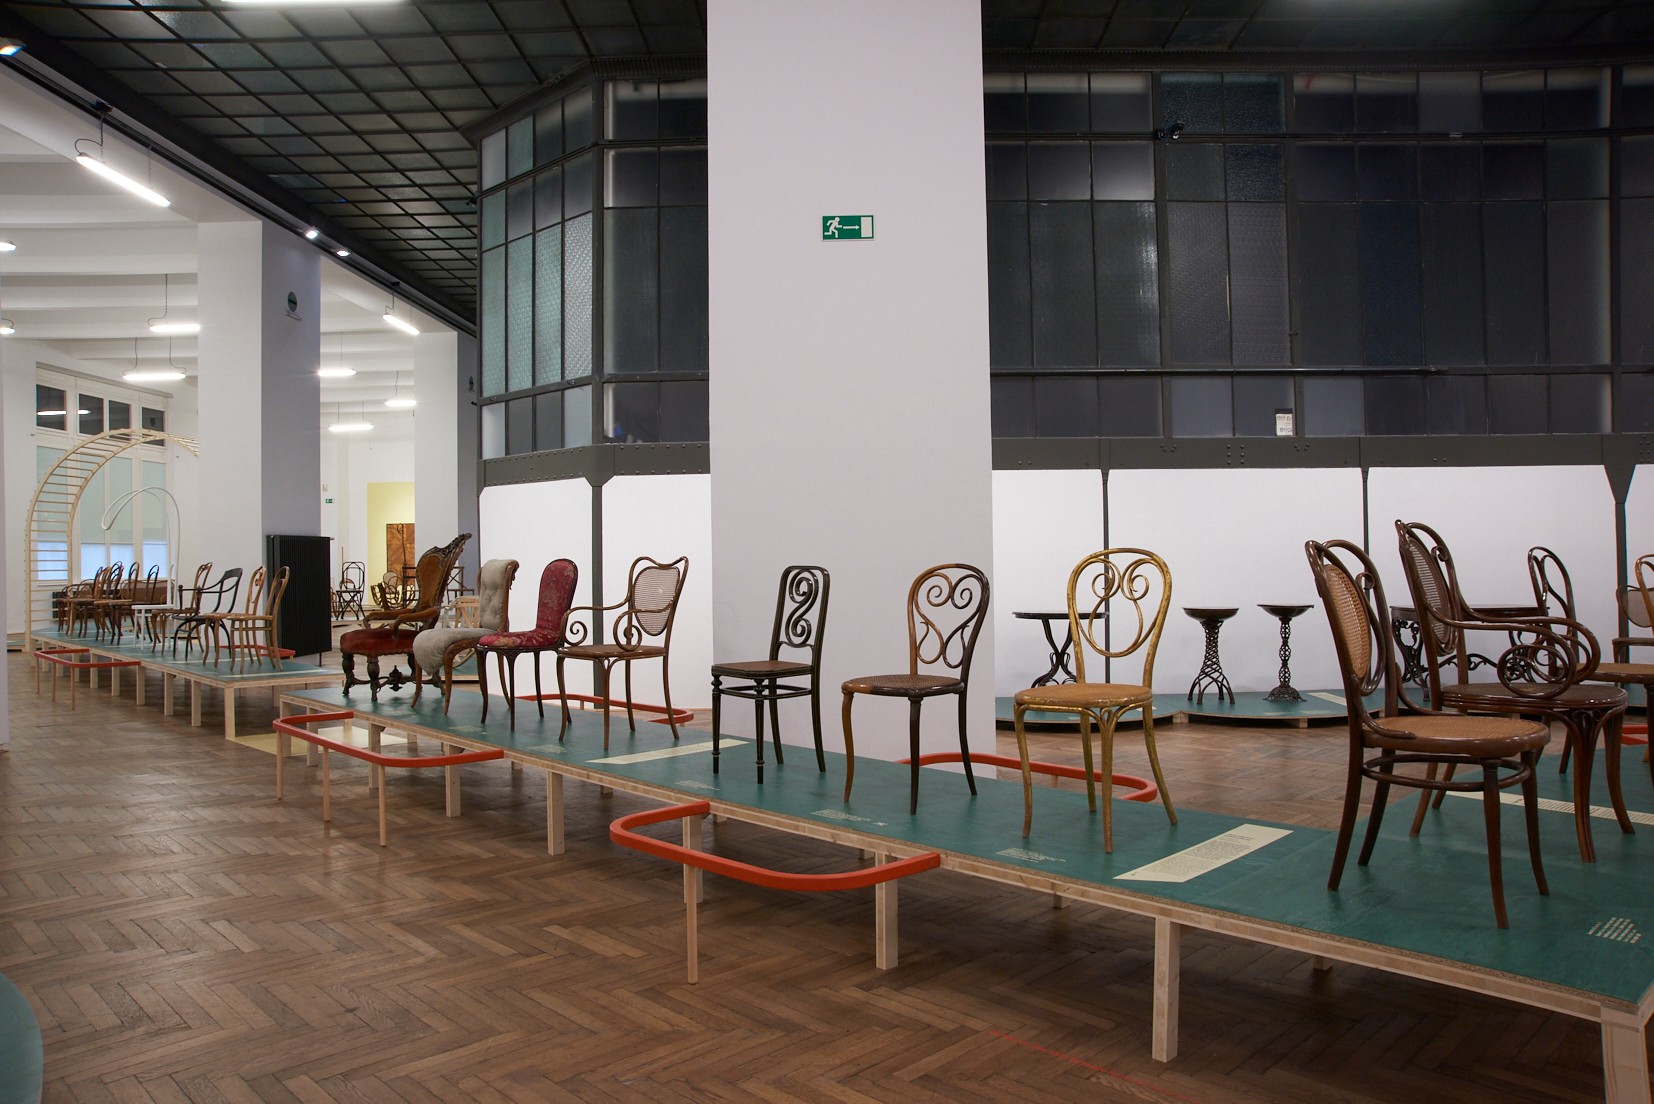 <BODY><div>MAK Exhibition View, 2019</div><div>BENTWOOD AND BEYOND</div><div>Thonet and Modern Furniture Design</div><div>MAK Exhibition Hall</div><div>© MAK/Georg Mayer</div></BODY>